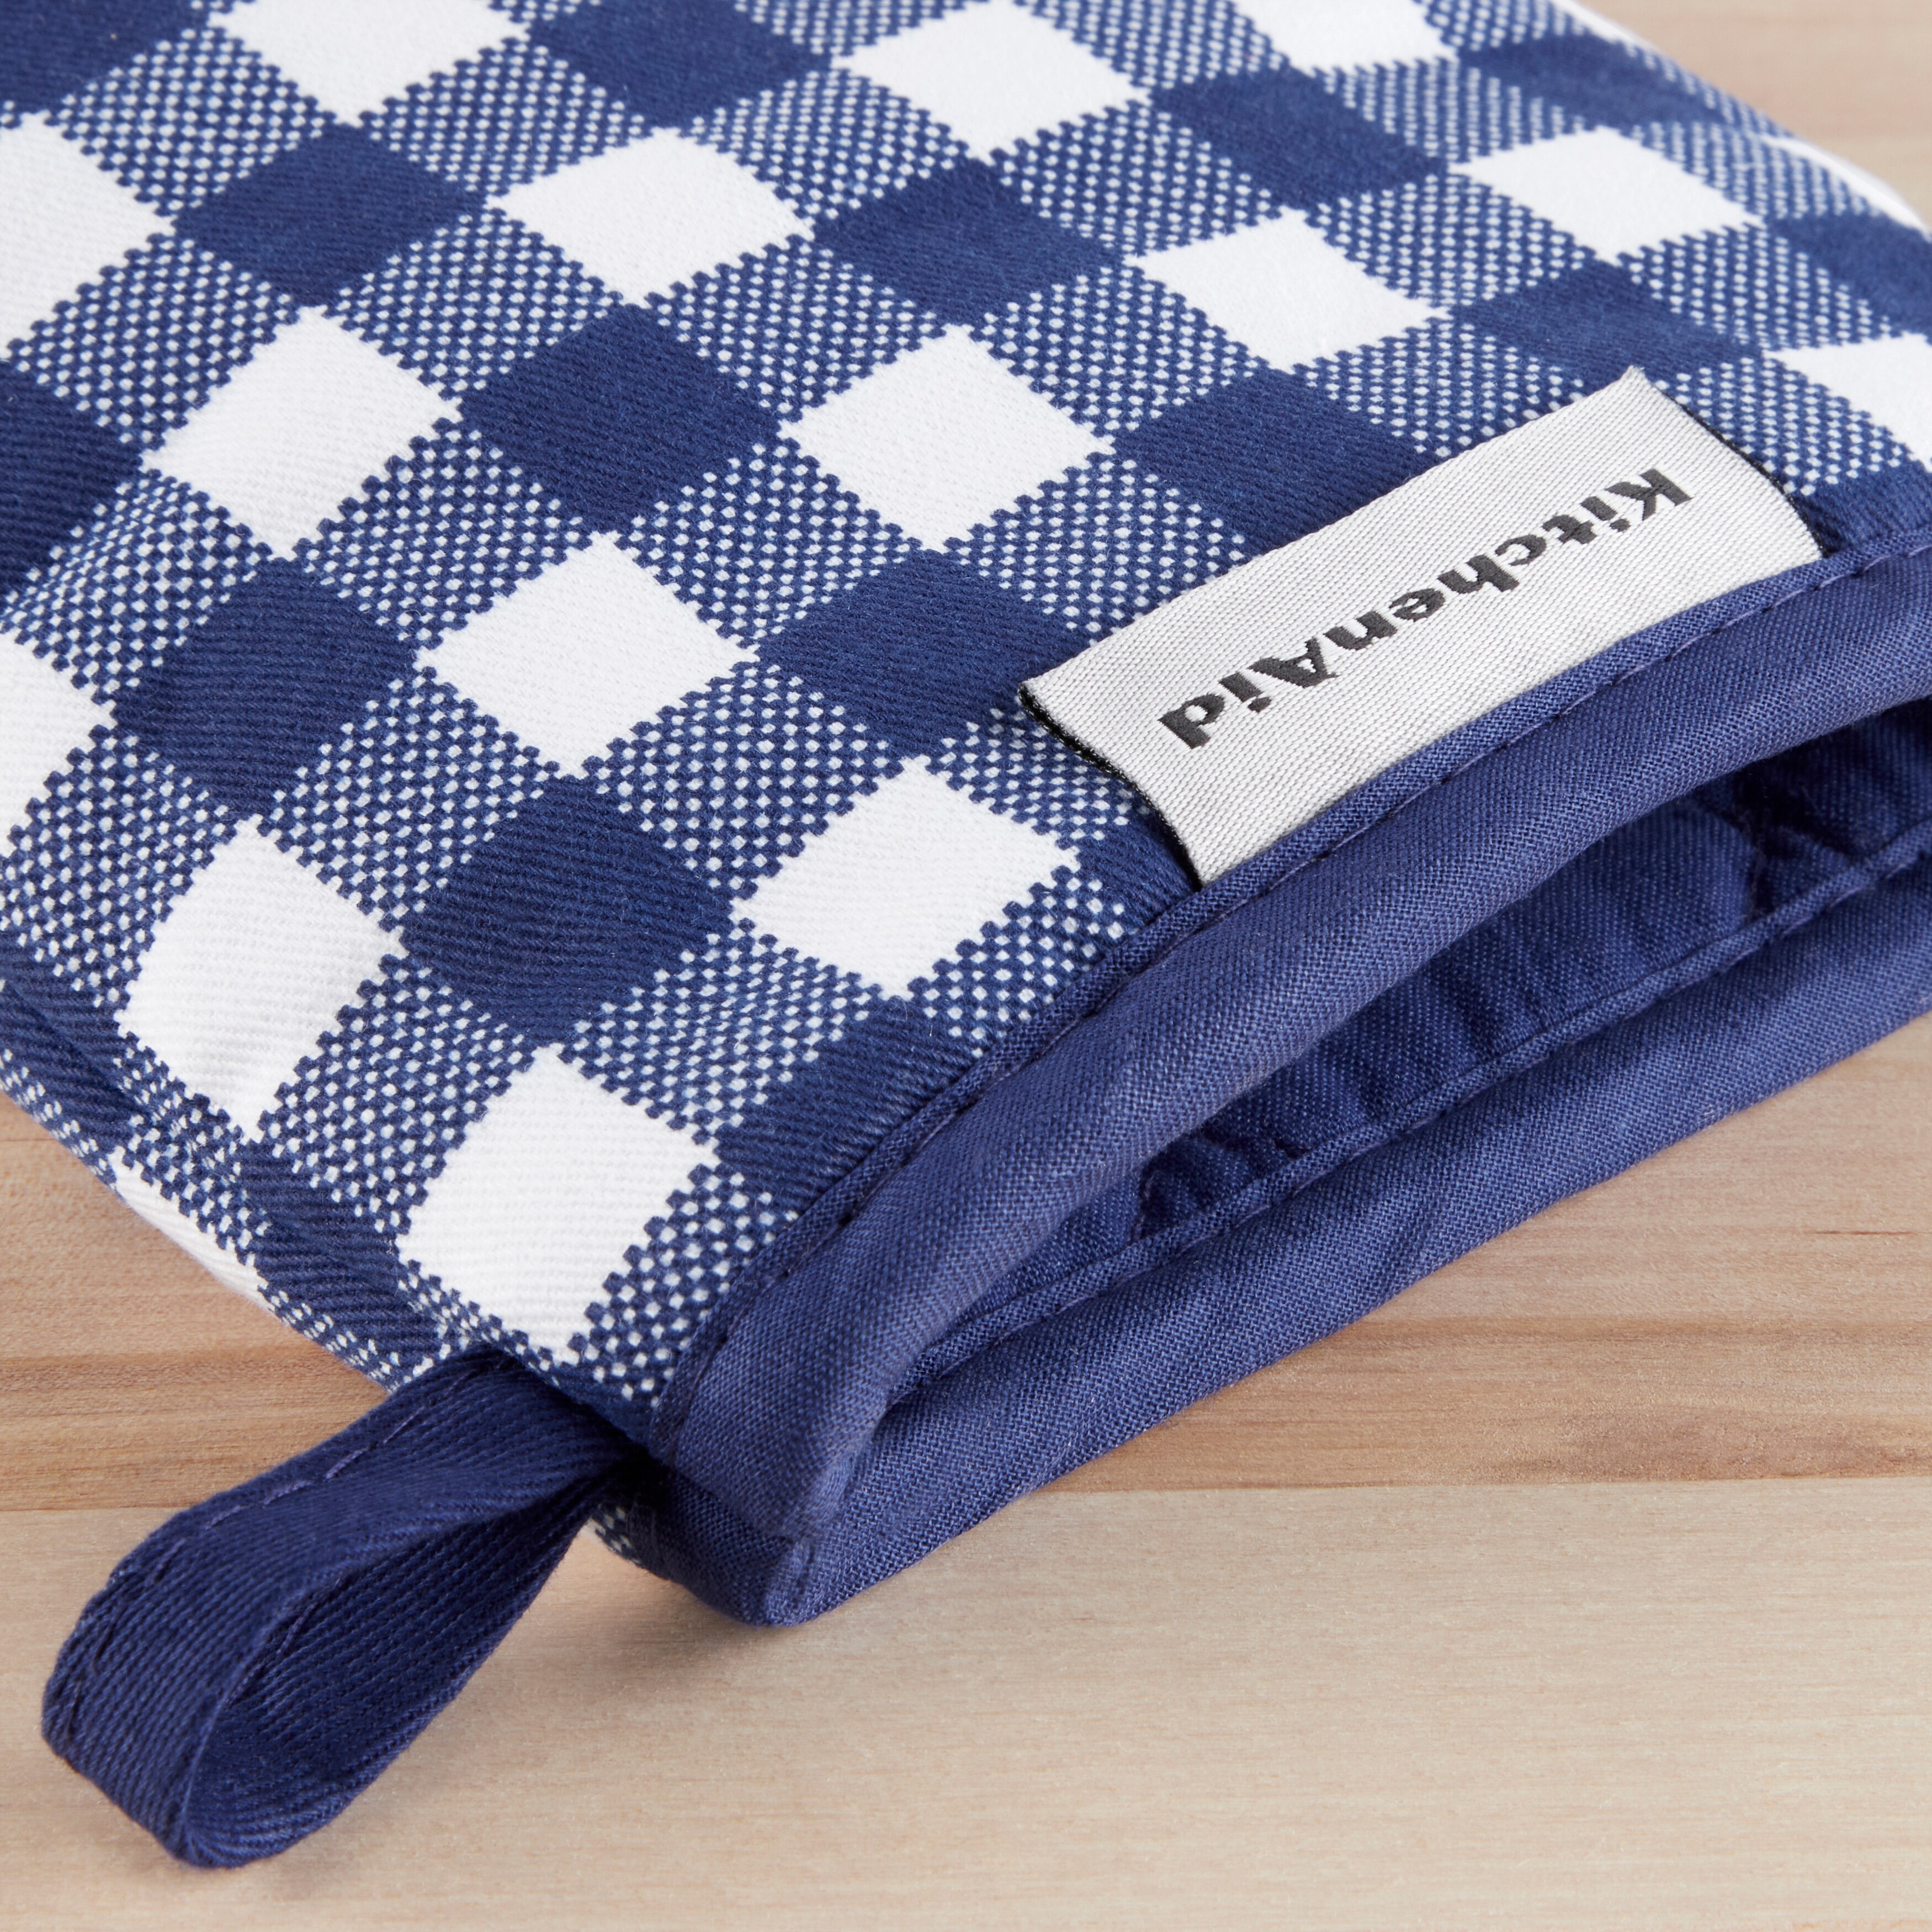 https://ak1.ostkcdn.com/images/products/is/images/direct/08728ada78fead2a6dc019d746f95a1c1181ae04/KitchenAid-Gingham-Mini-Oven-Mitt-2-Pack-Set.jpg